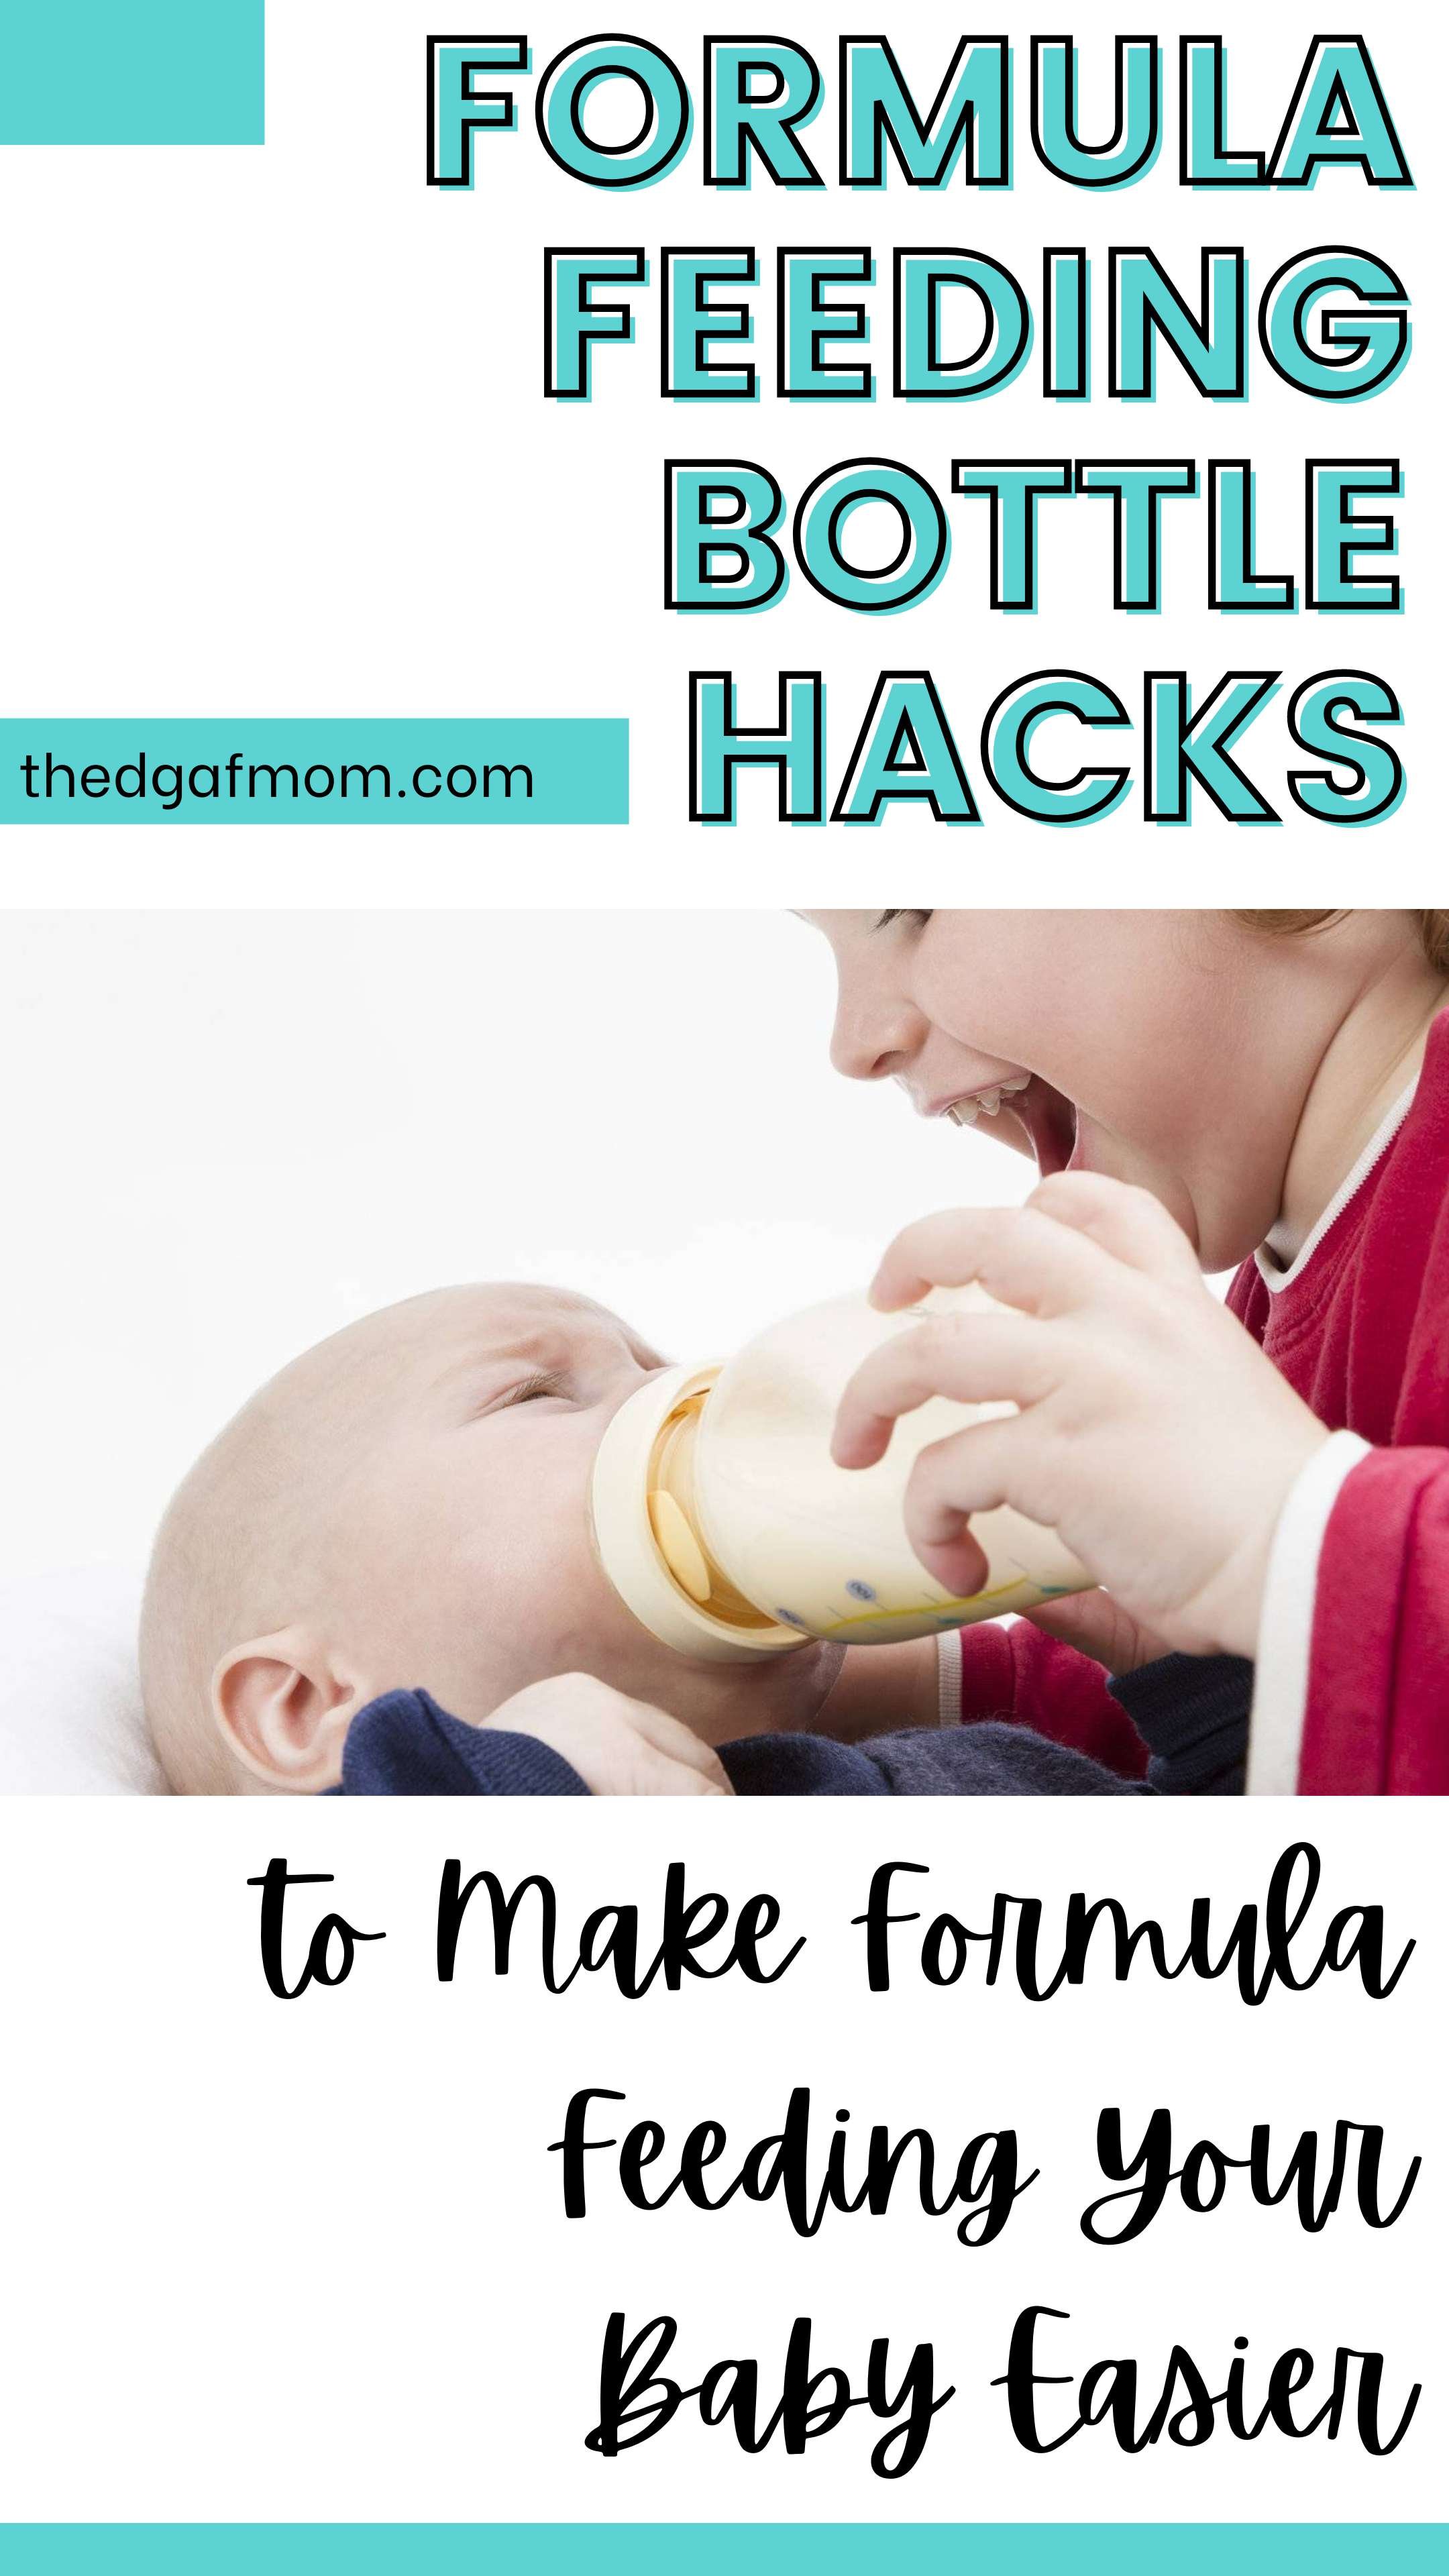 Need help with formula feeding? These formula feeding bottle hacks will make your life a lot easier, whether you're a combo feeder or are just making the shift from breastfeeding, we've got the best tips to simplify formula feeding at home.